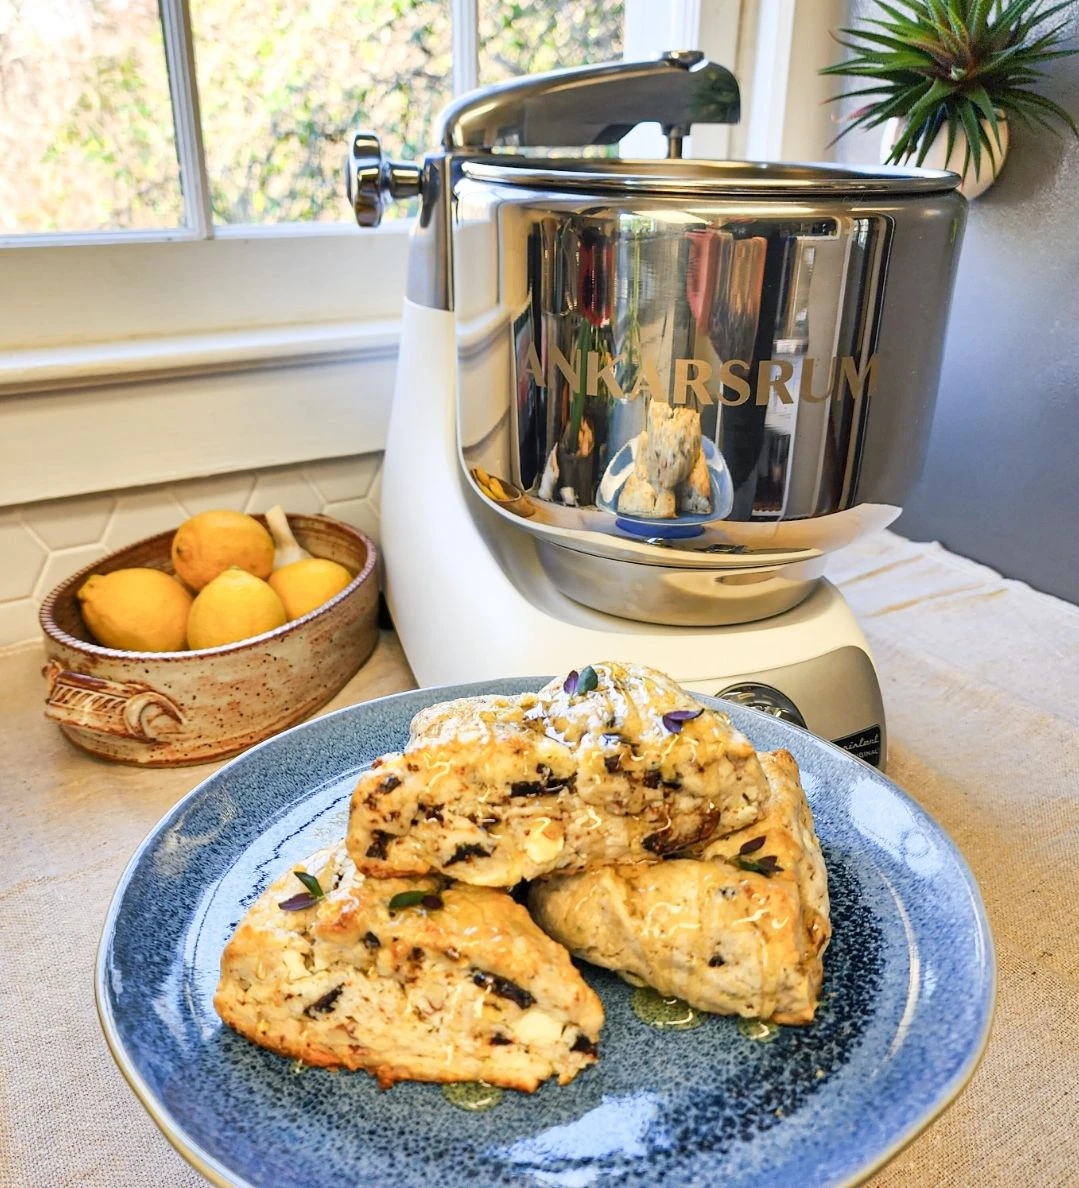 Savory Scones: Freshly baked, homecrafted delights featuring a flavorful blend of herbs, goat cheese, figs, and pecans.